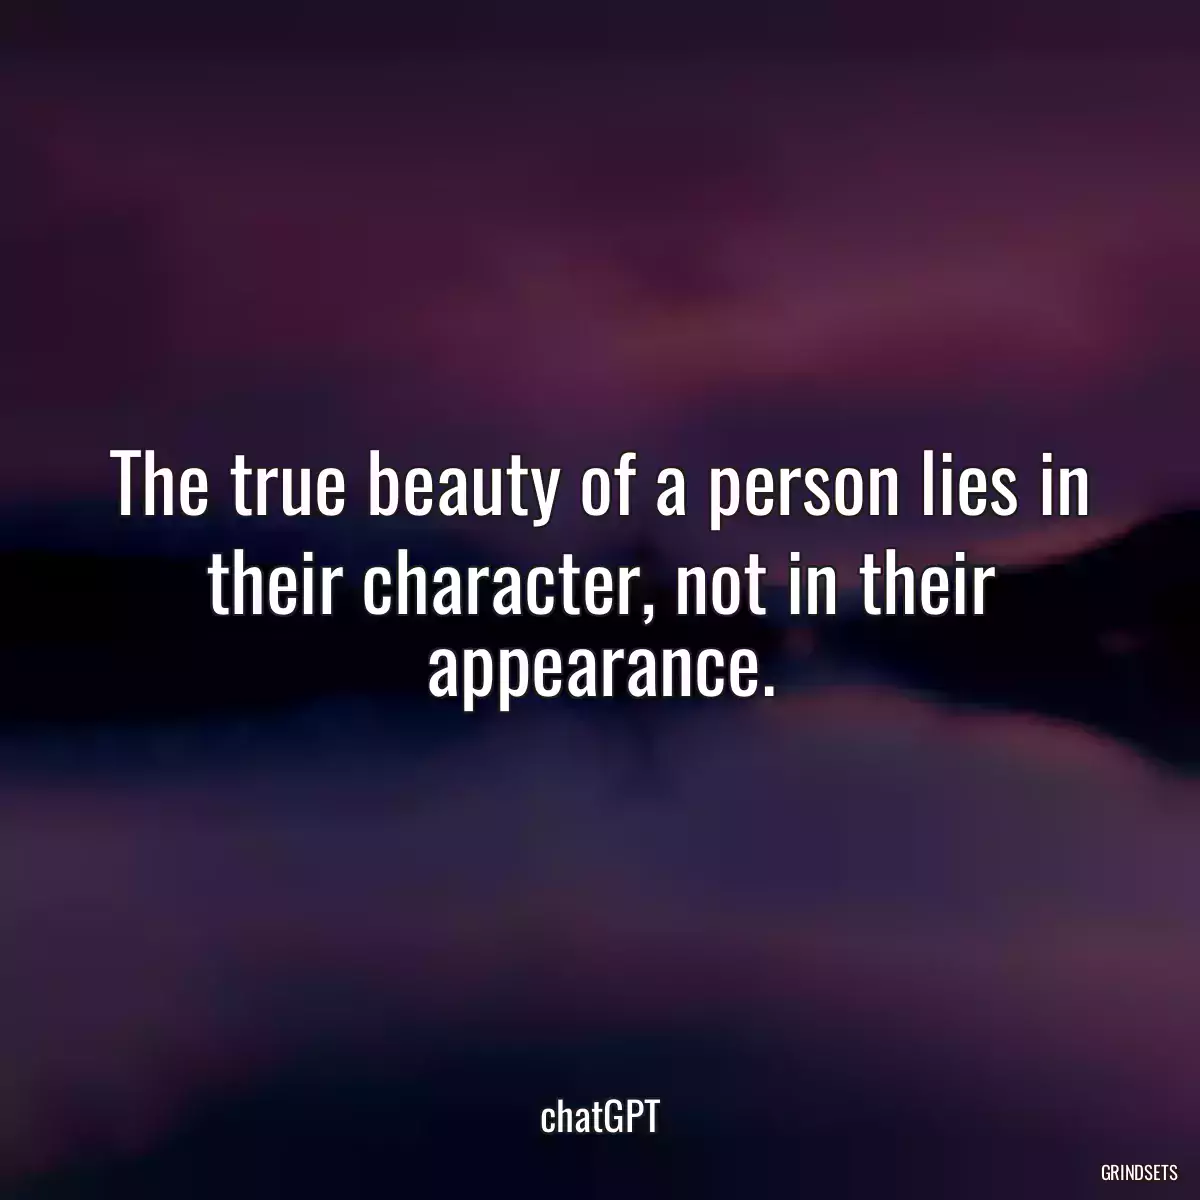 The true beauty of a person lies in their character, not in their appearance.